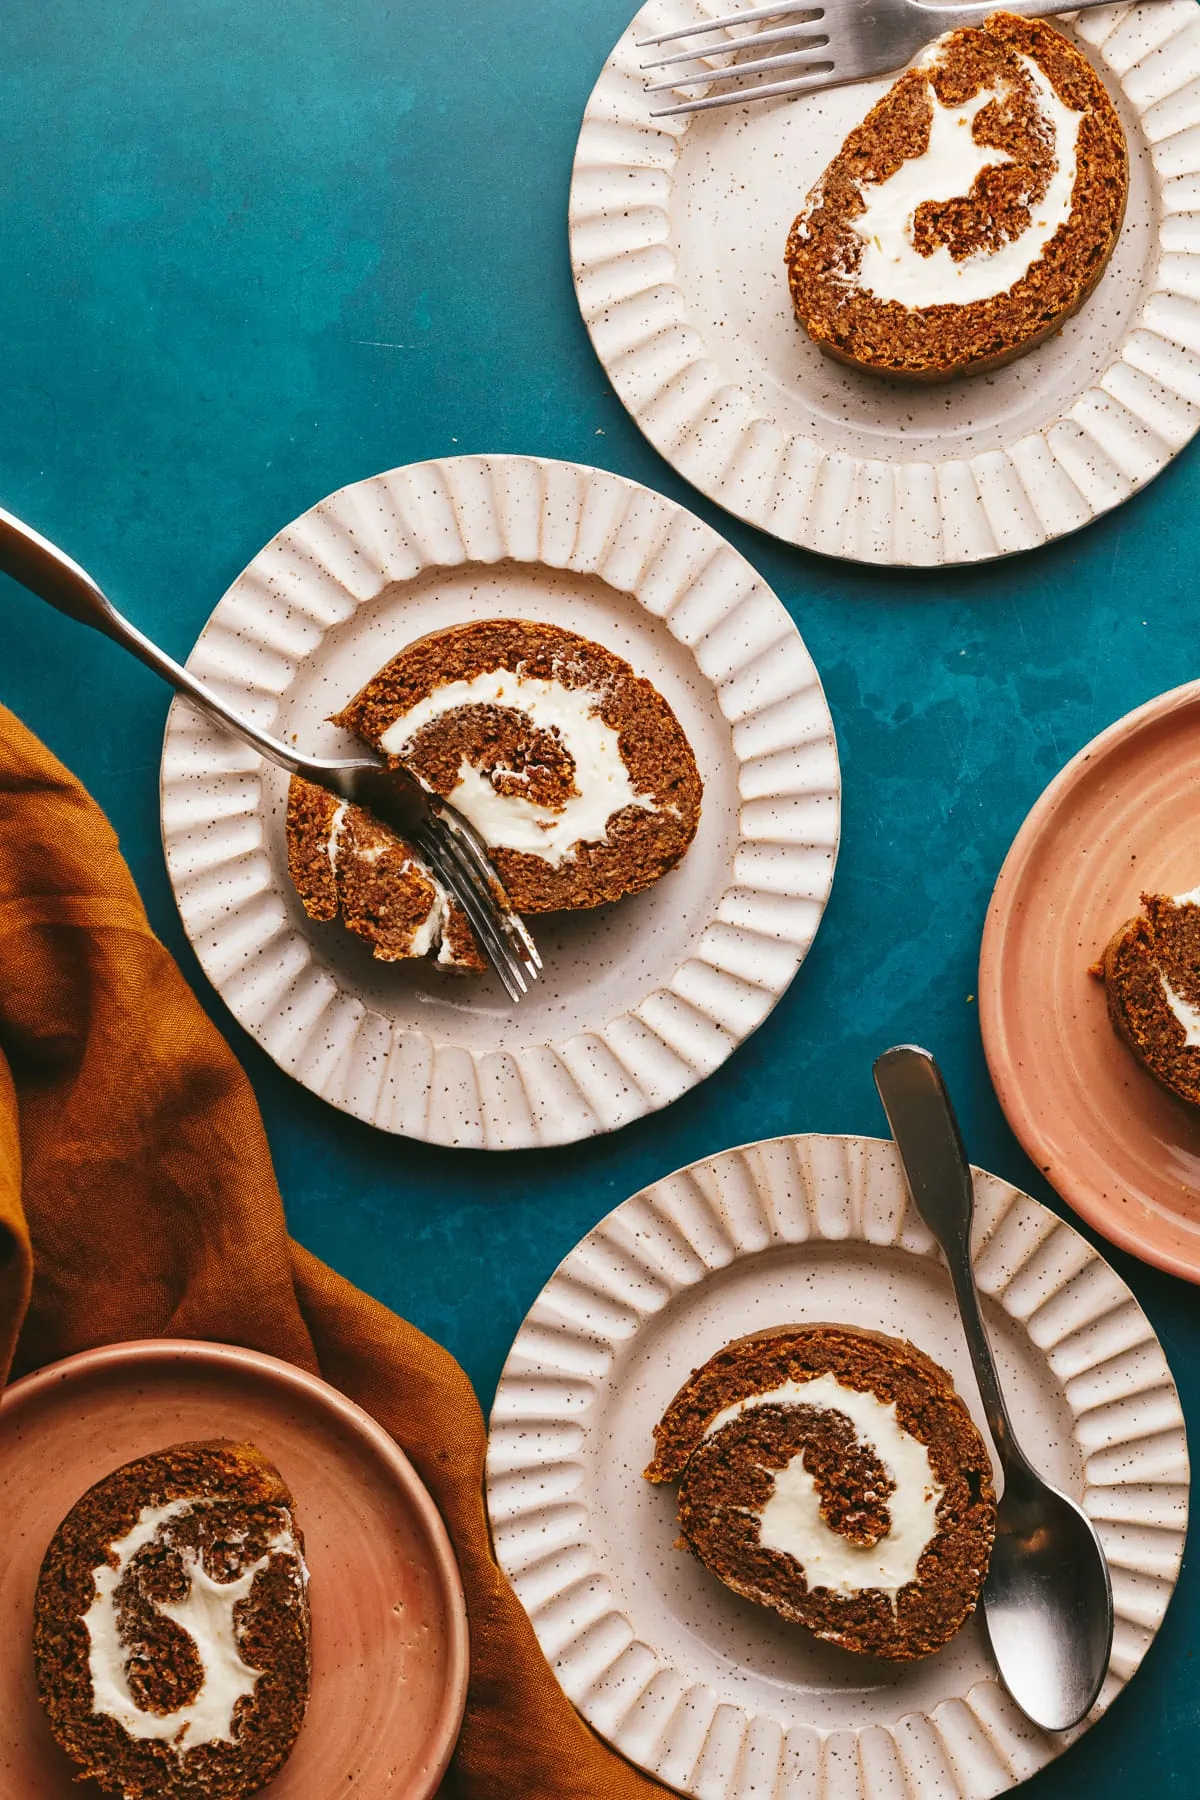 Gluten free pumpkin roll slices on plates with forks.